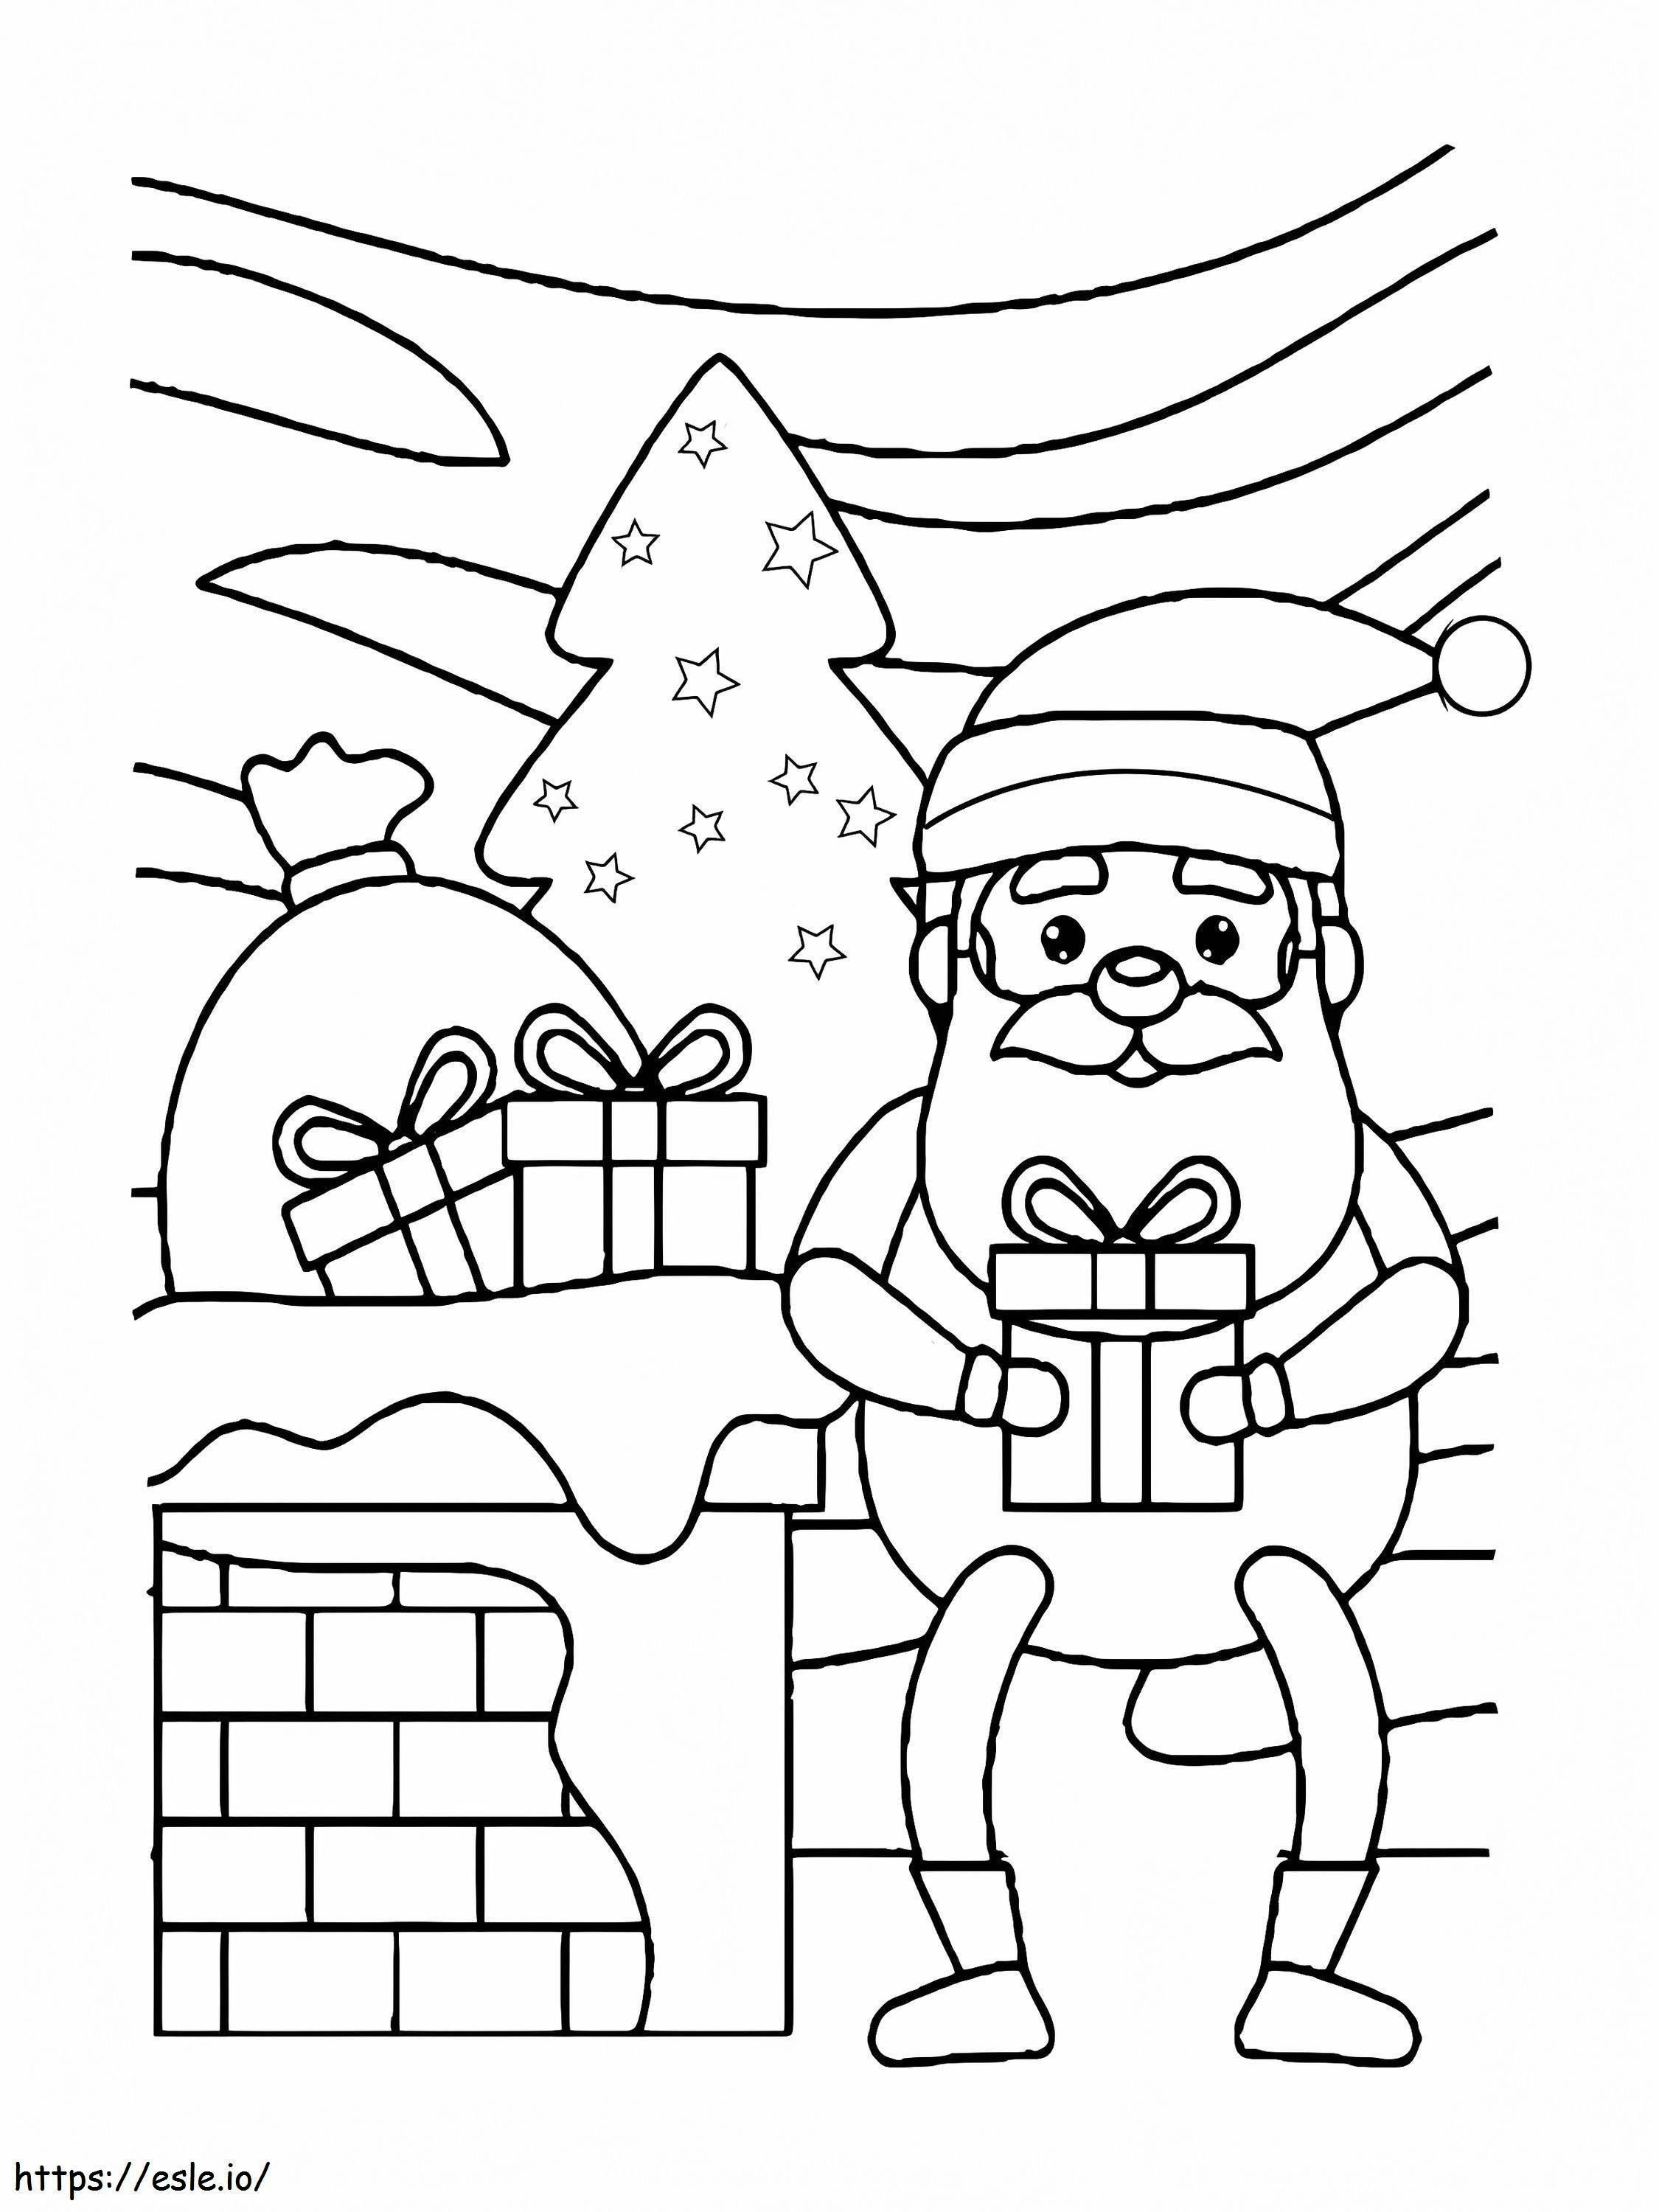 Santa Claus With Presents coloring page